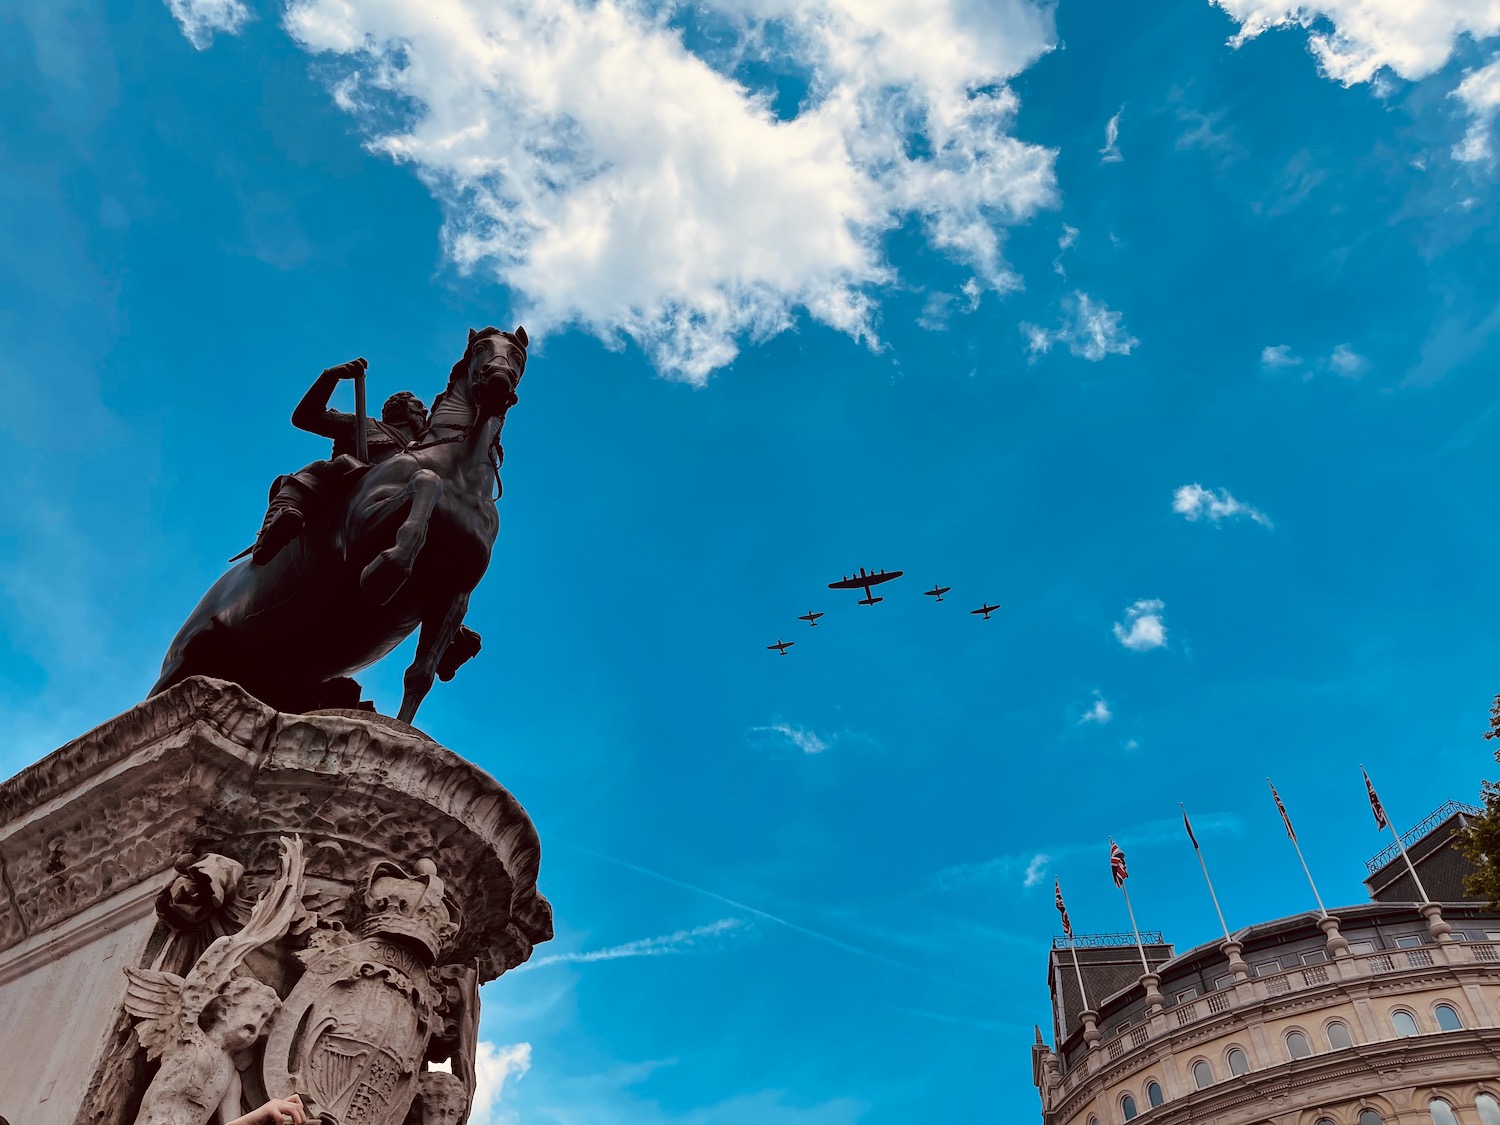 a statue of a man on a horse and planes flying in the sky